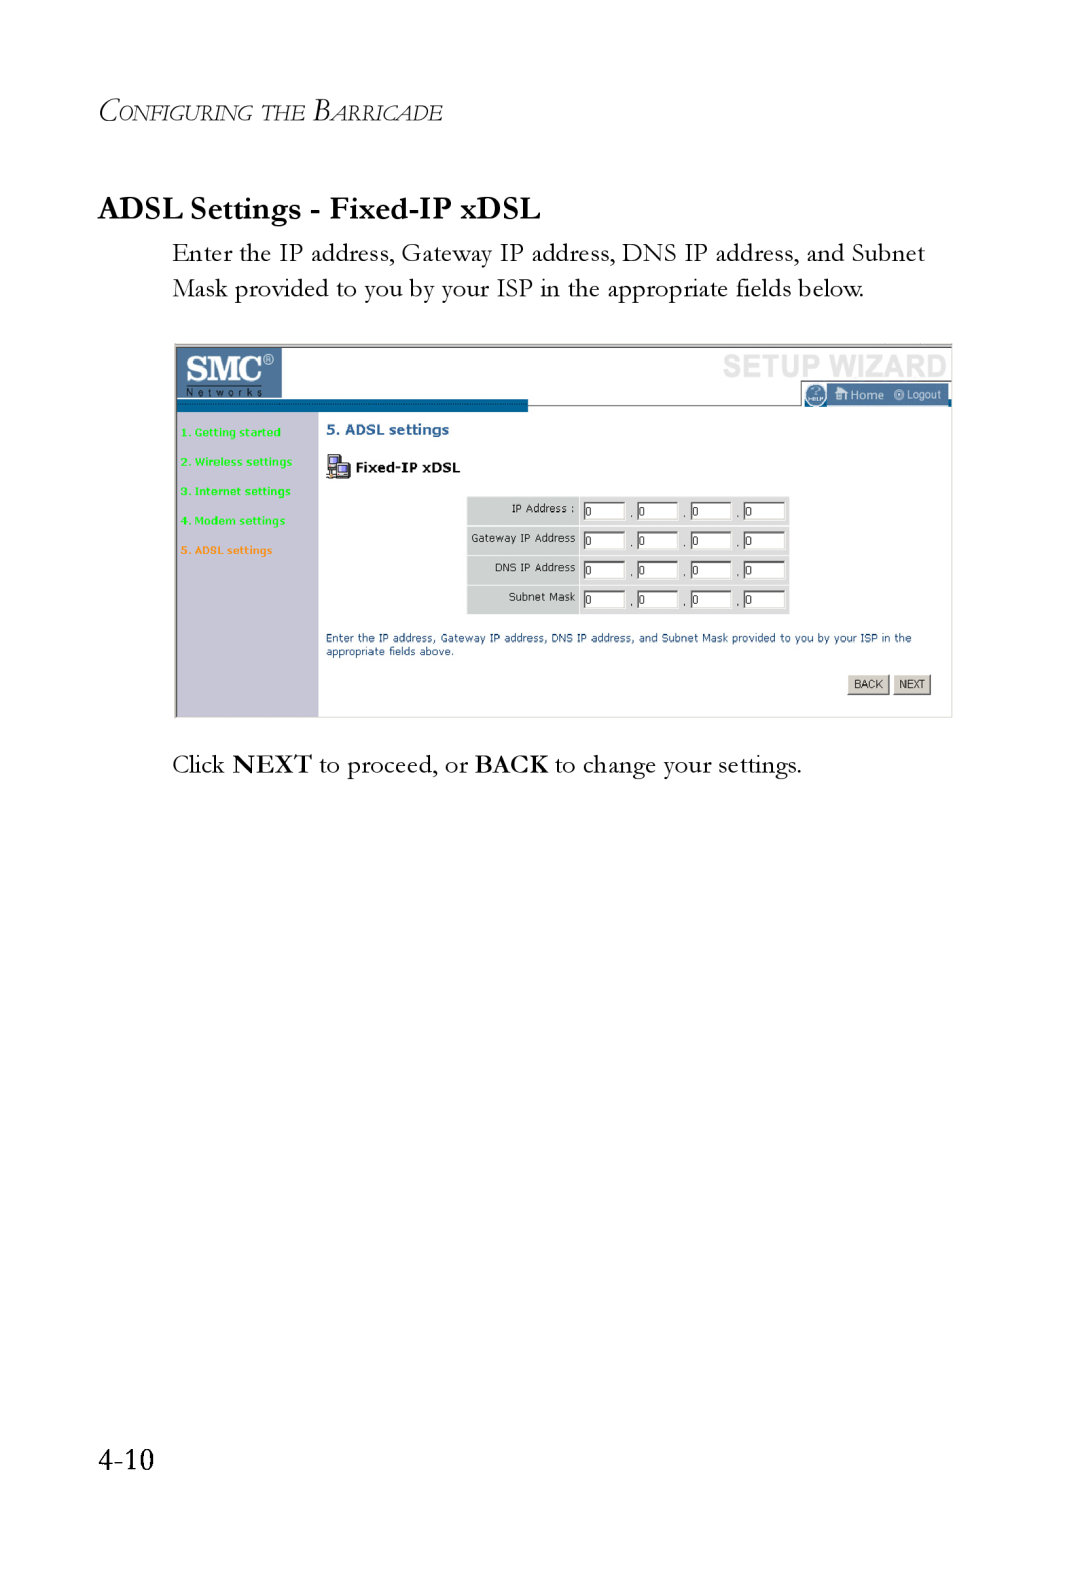 SMC Networks SMCWBR14T-G manual 4-10, ADSL Settings - Fixed-IP xDSL, Click NEXT to proceed, or BACK to change your settings 